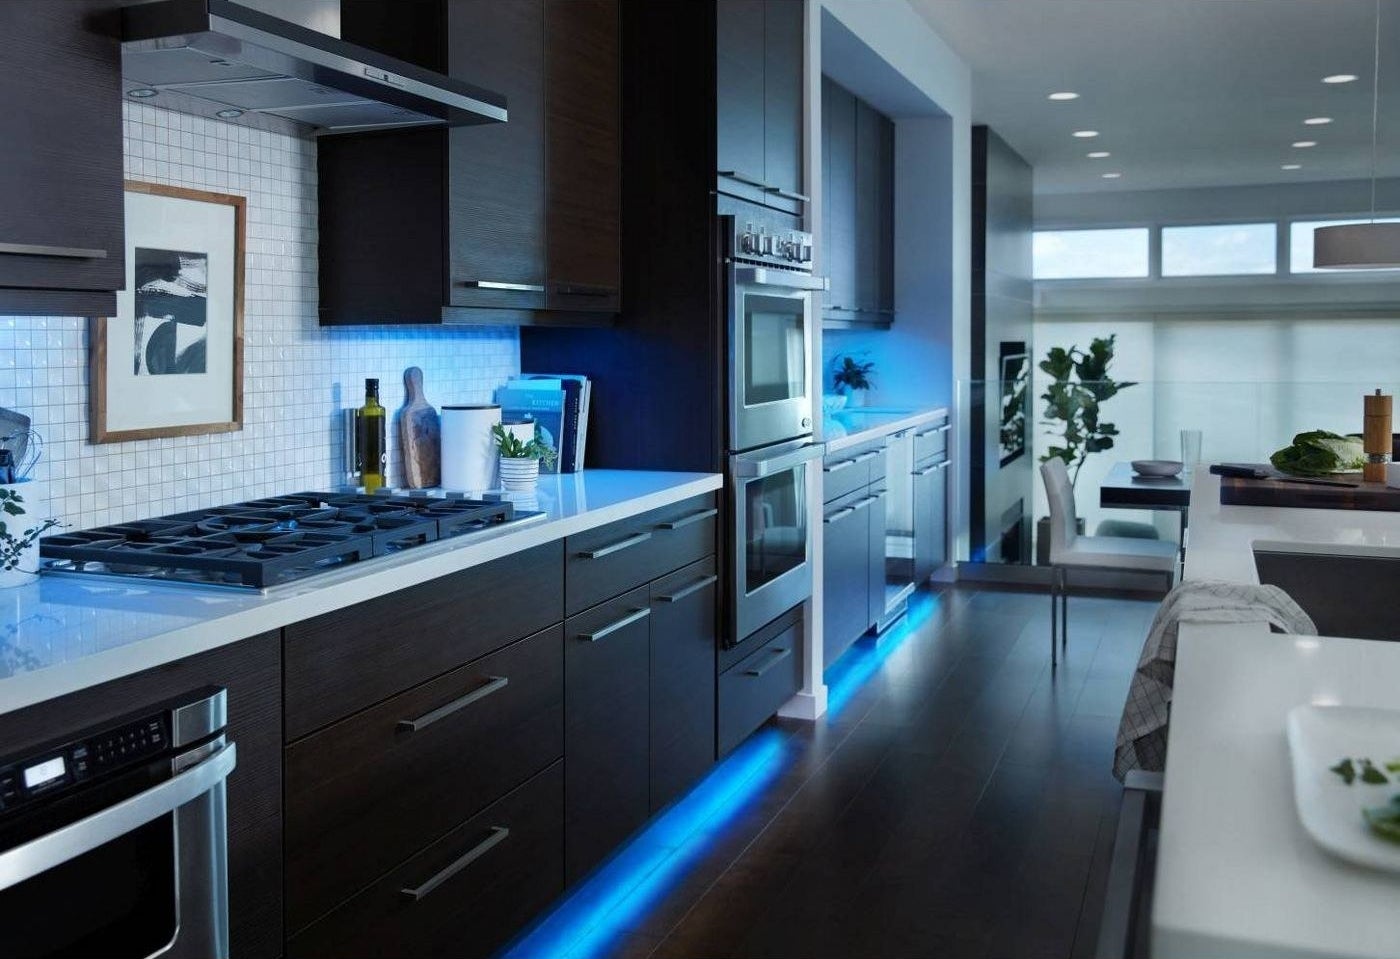 The lights in a kitchen, set to blue